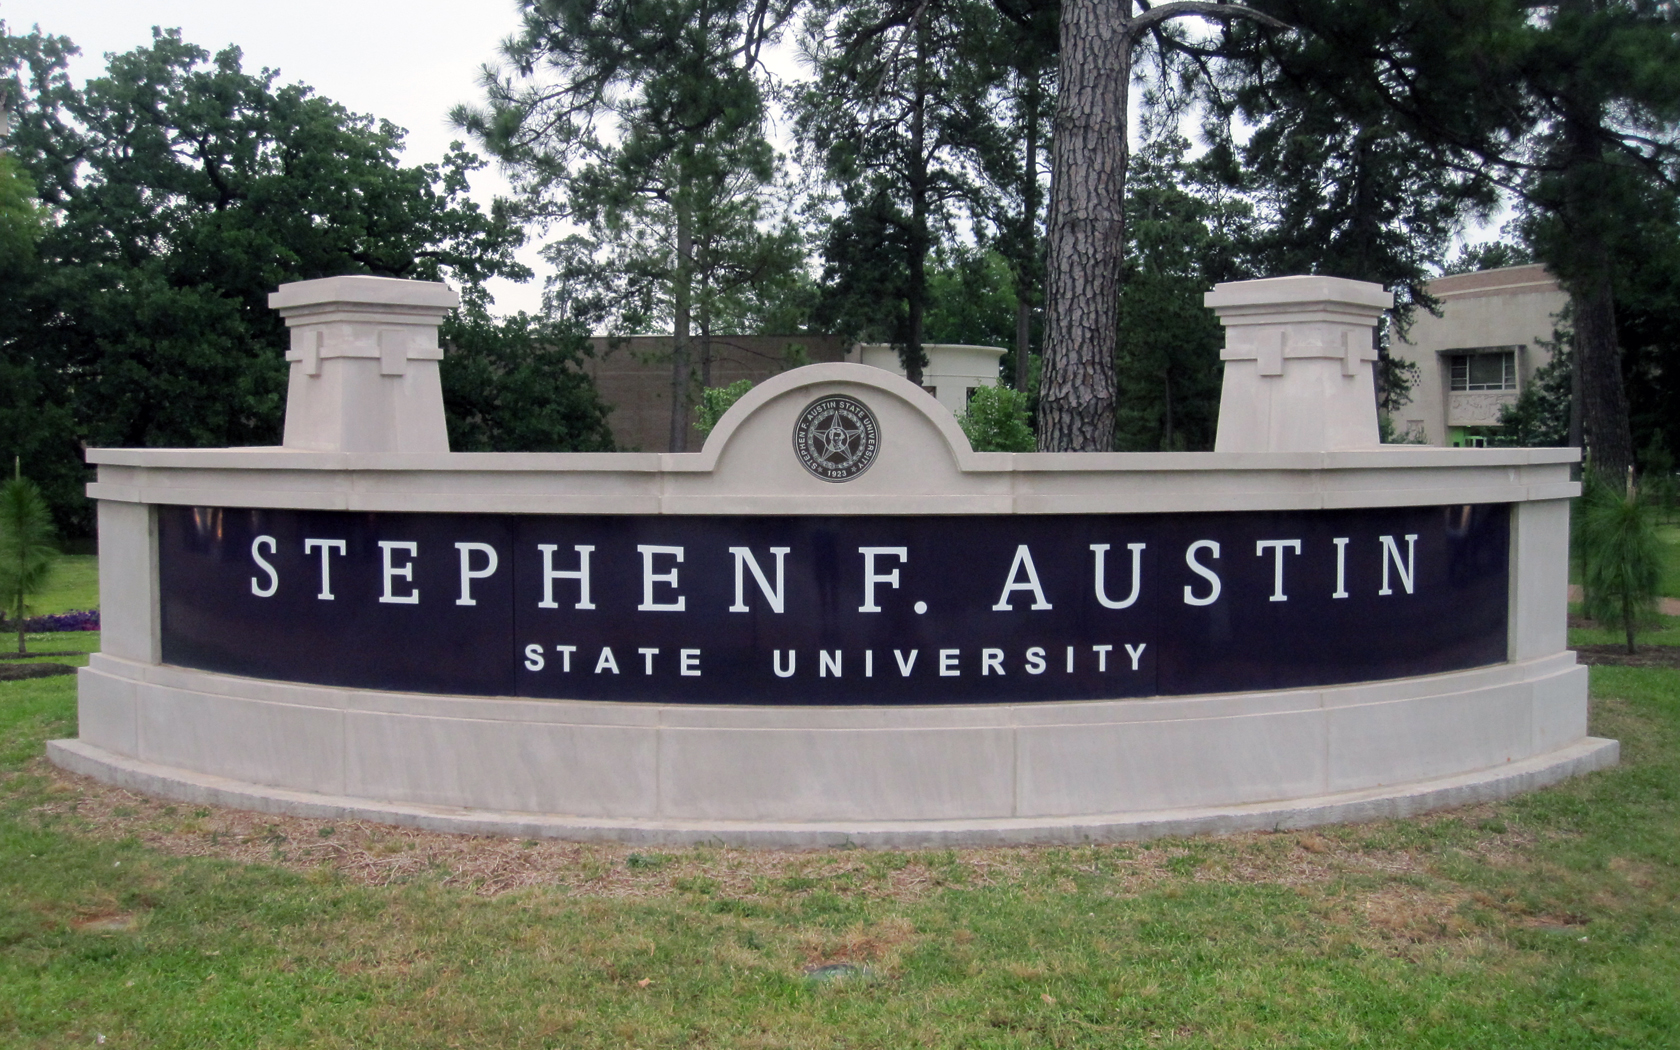 Stephen F. Austin State University moves to join the University of